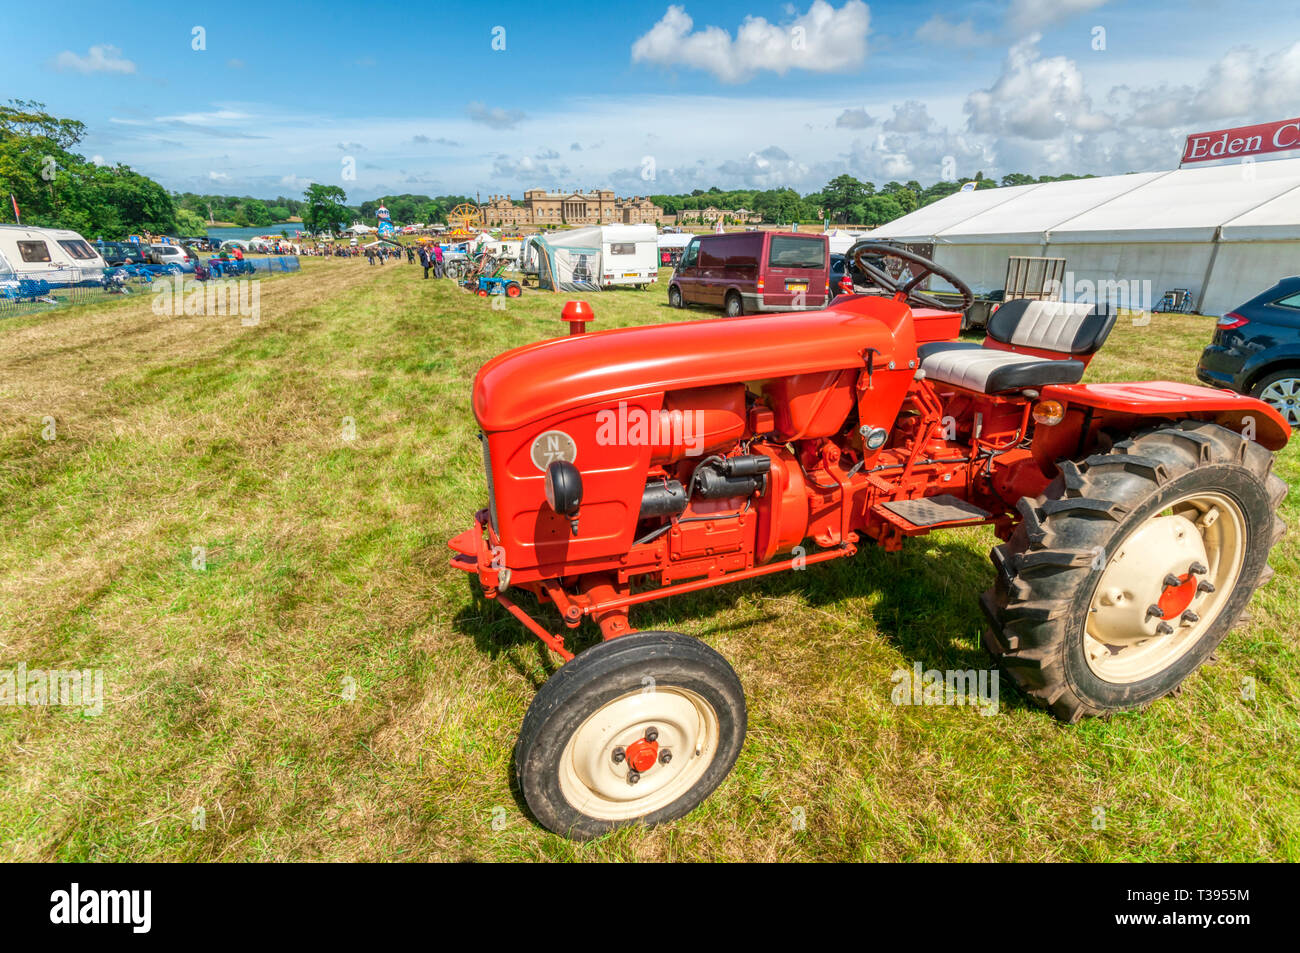 A Renault N73 tractor from the 1960s exhibited at Holkham Country Fair in the grounds of Holkham Hall in North Norfolk. Stock Photo